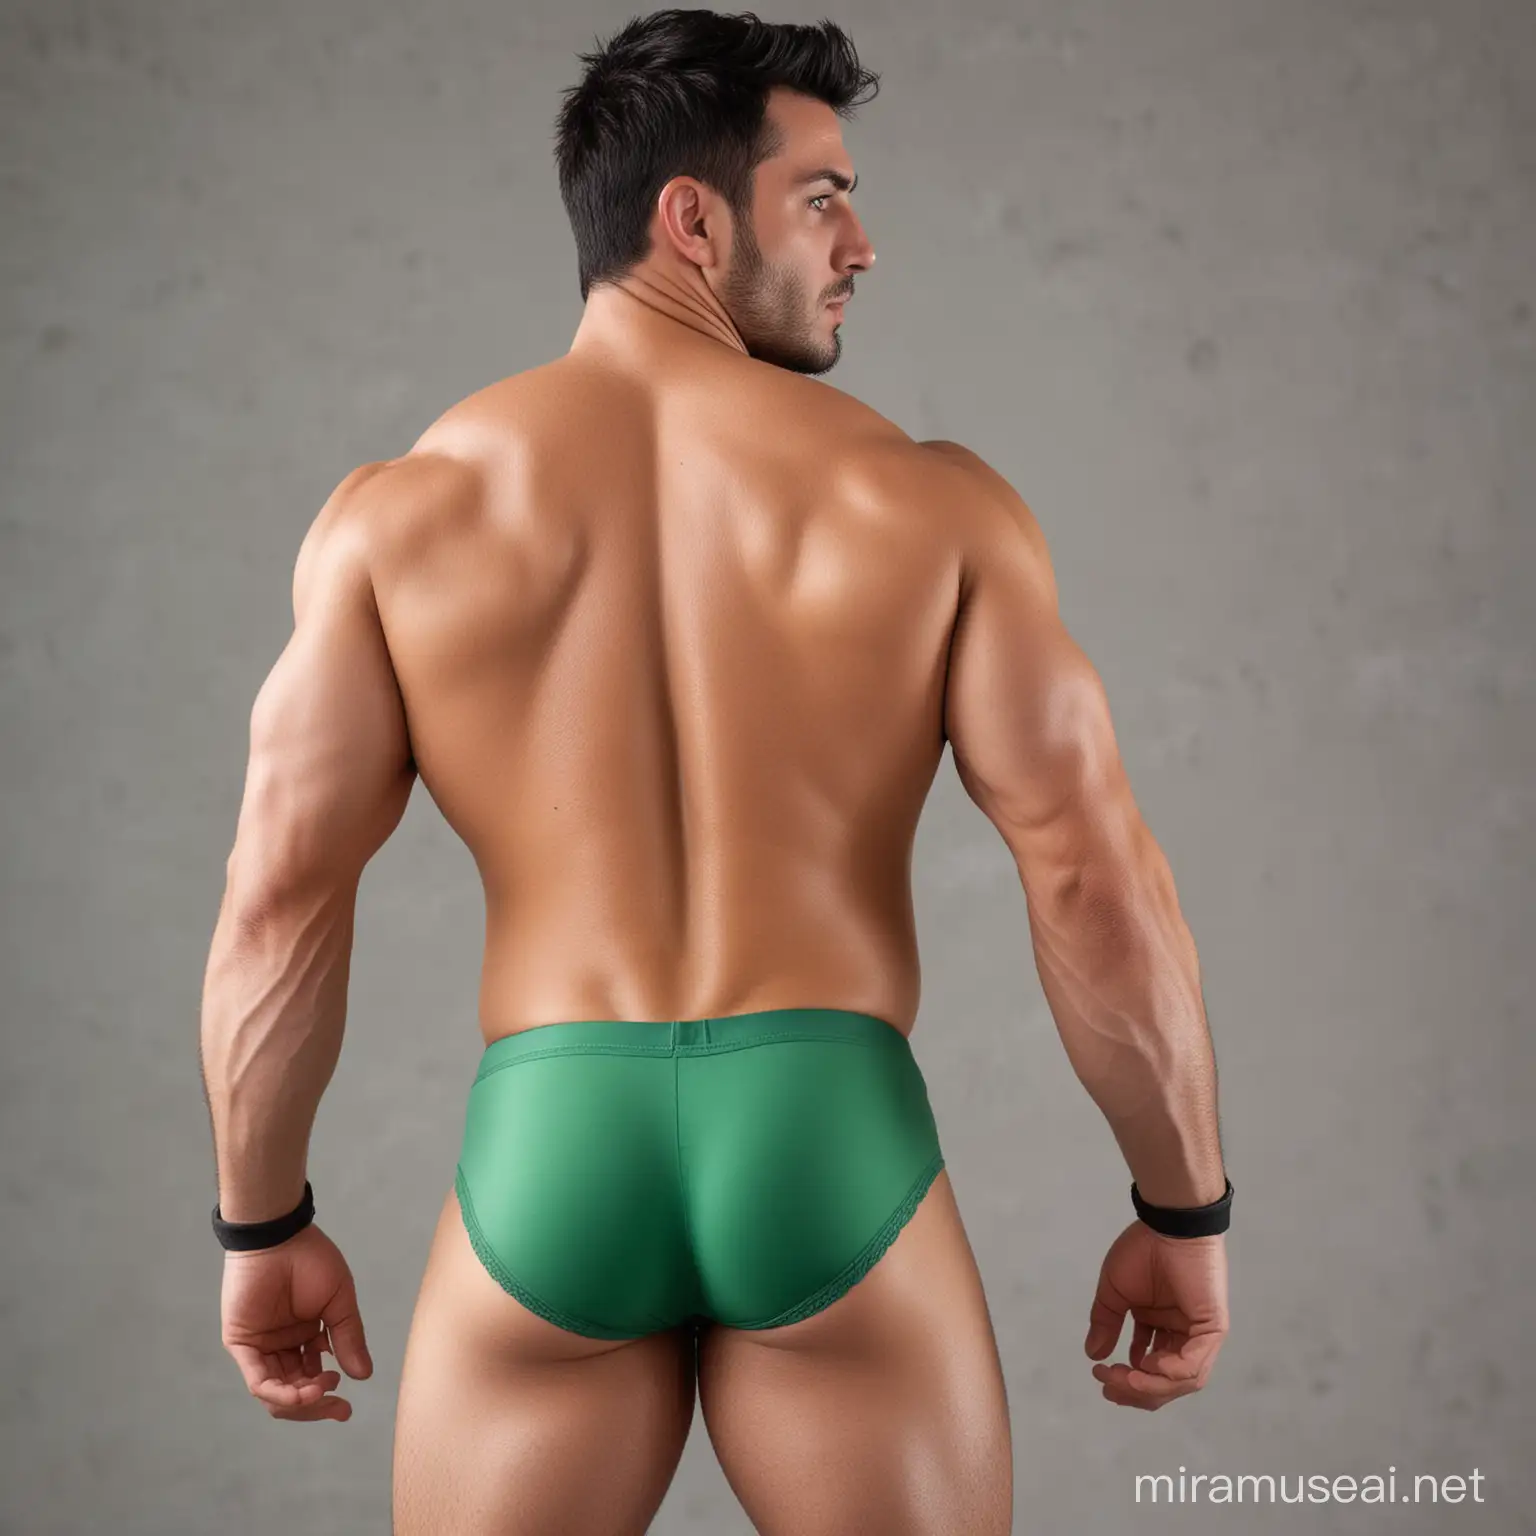 Charming muscular 30 year old male Argentine wrestler, with short spiky black hair, slight tanned skin and grey eyes, well defined buttocks, wearing green underwear, rear view